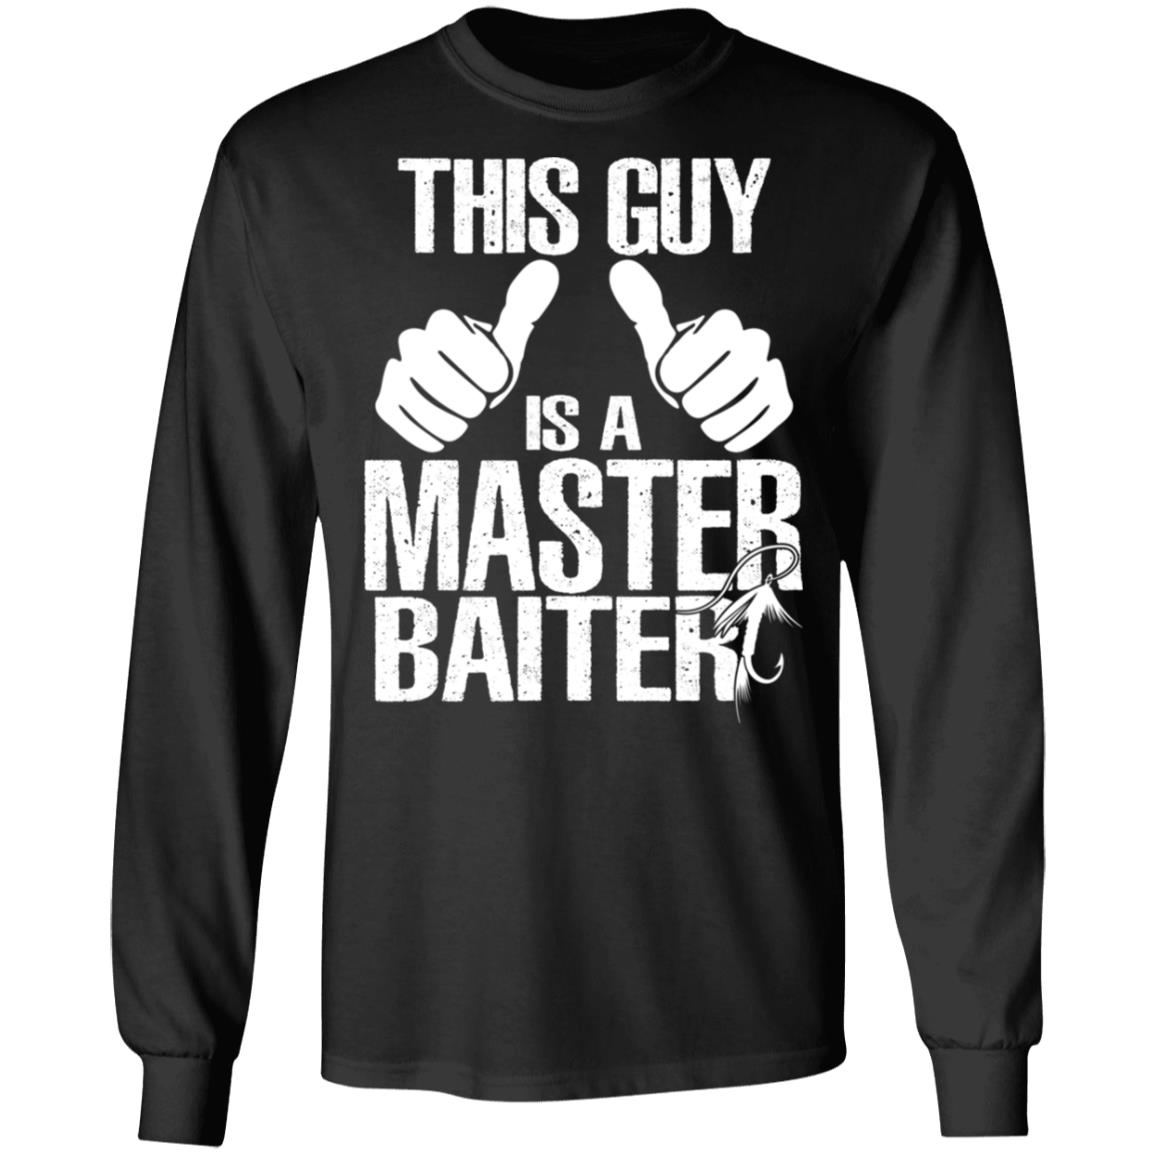 This Guy Is A Master Baiter Shirt